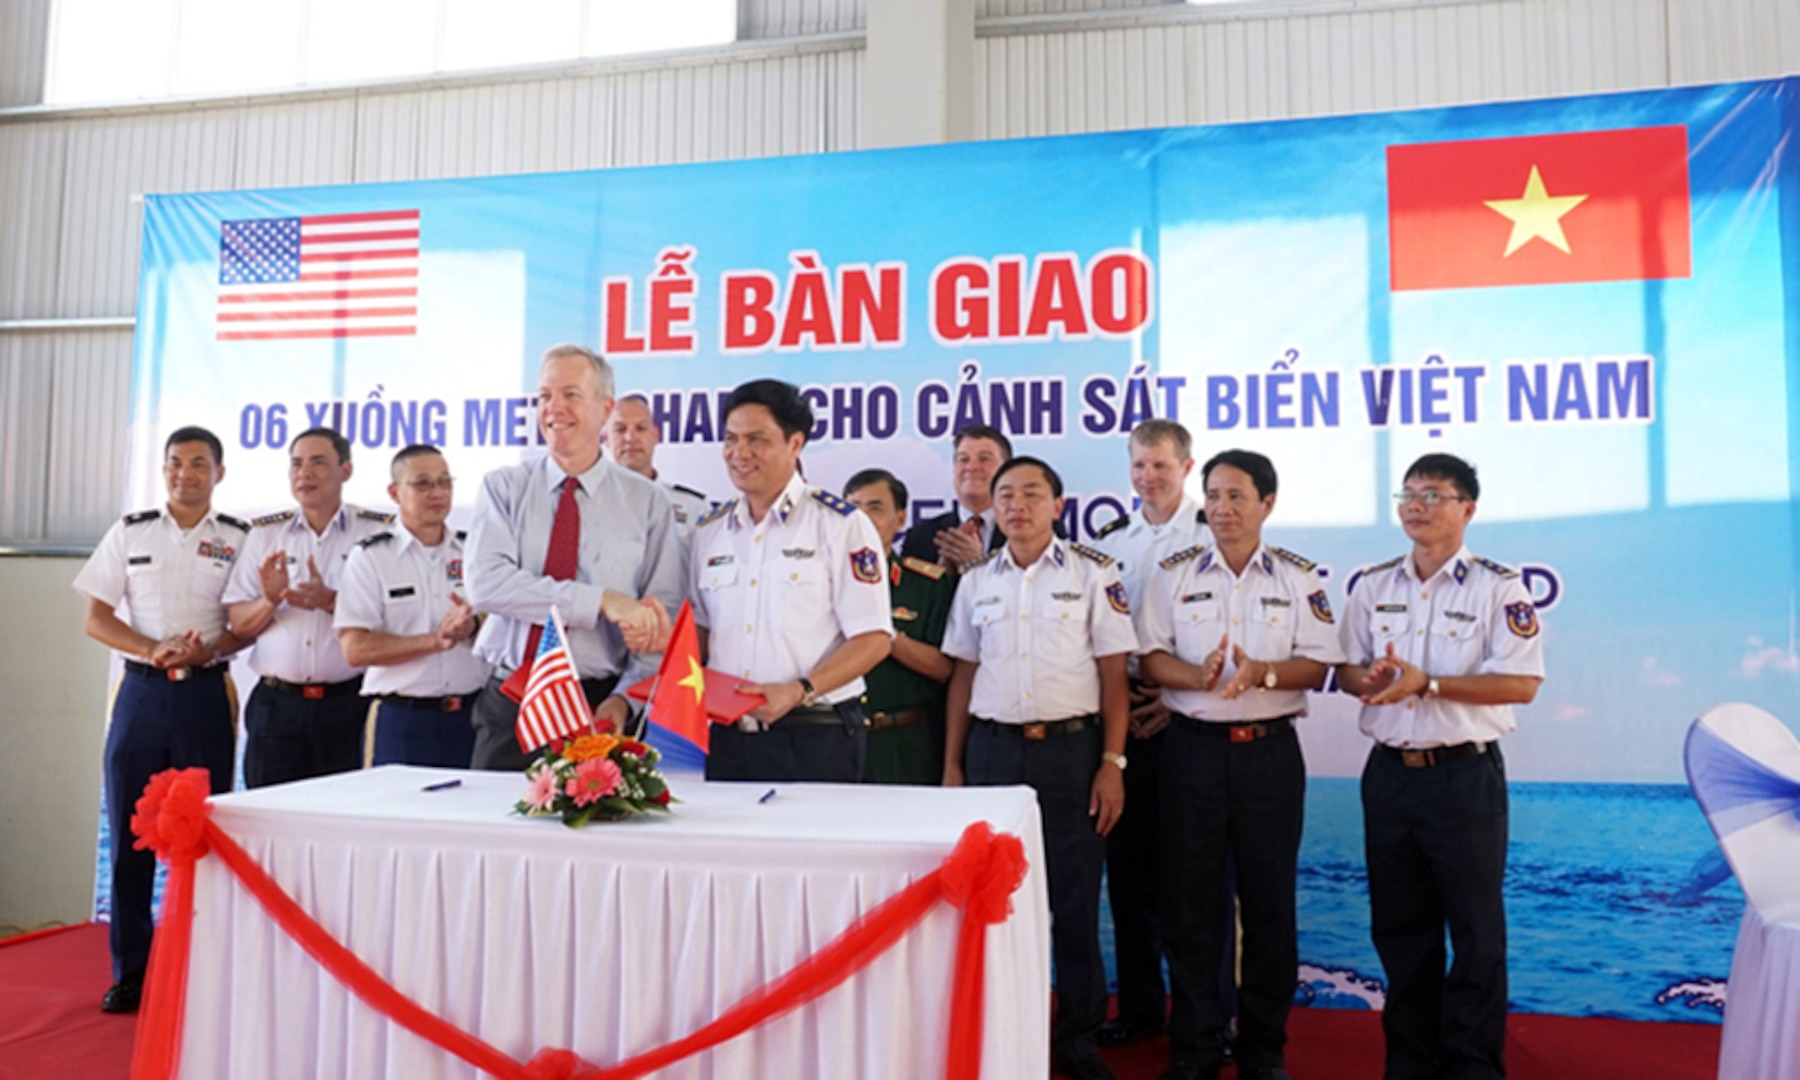 U.S. transfers Six Coastal Patrol Boats to Vietnam Coast Guard, May 22, 2017  The U.S. Embassy, through its Office of Defense Cooperation, coordinates U.S.-Vietnam security cooperation activities on behalf of U.S. Pacific Command to advance common defense goals and interests.